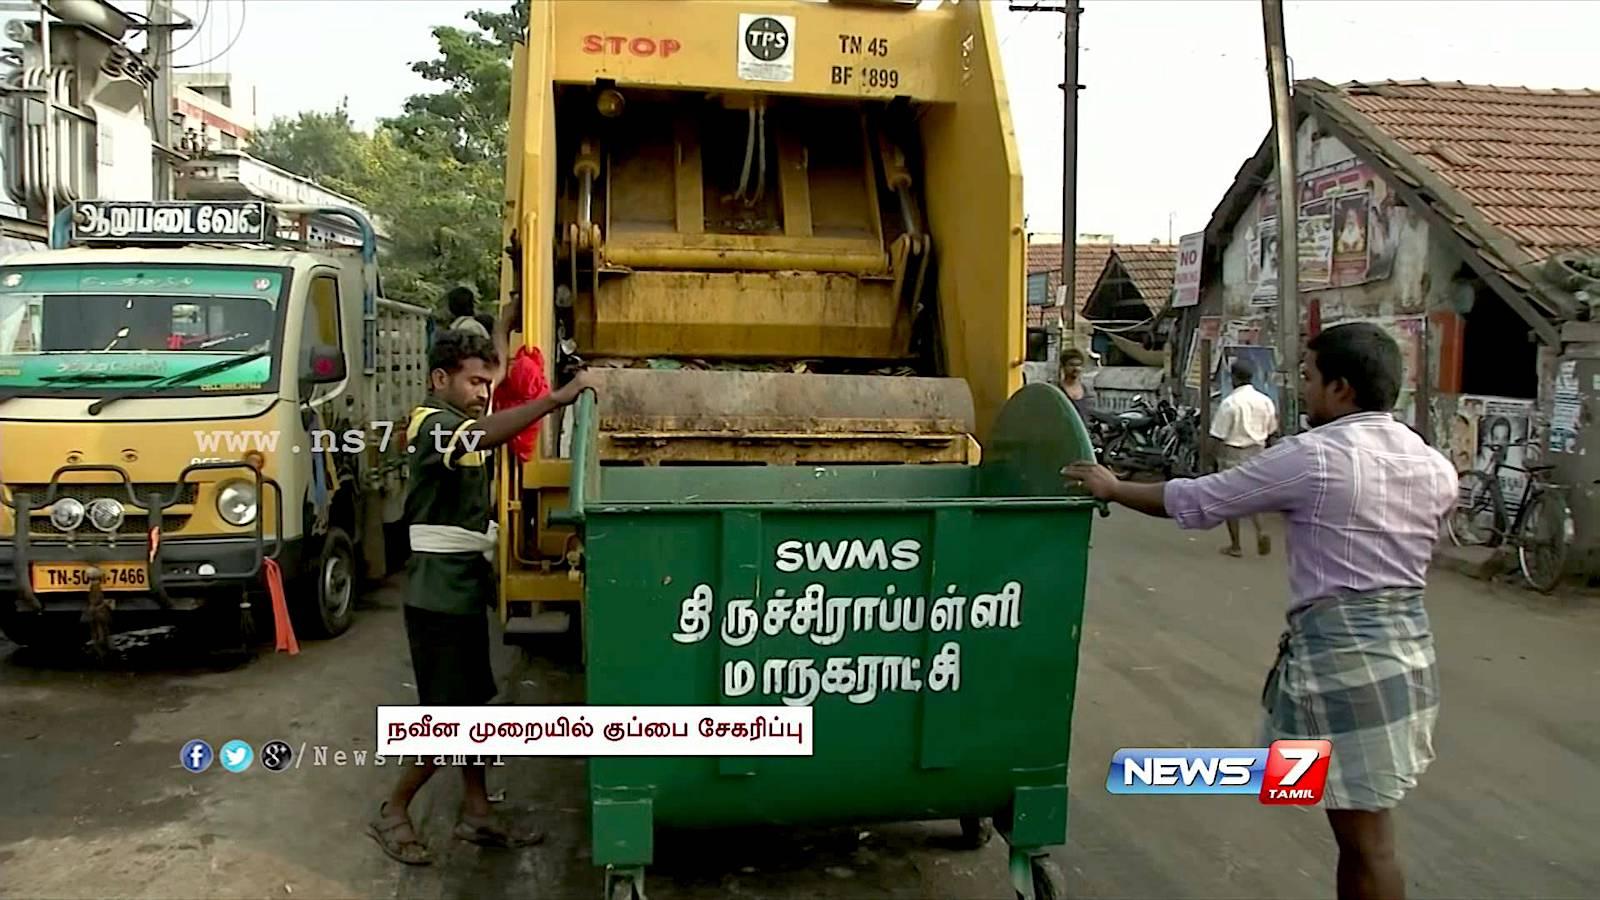 Garbage truck collecting waste in India